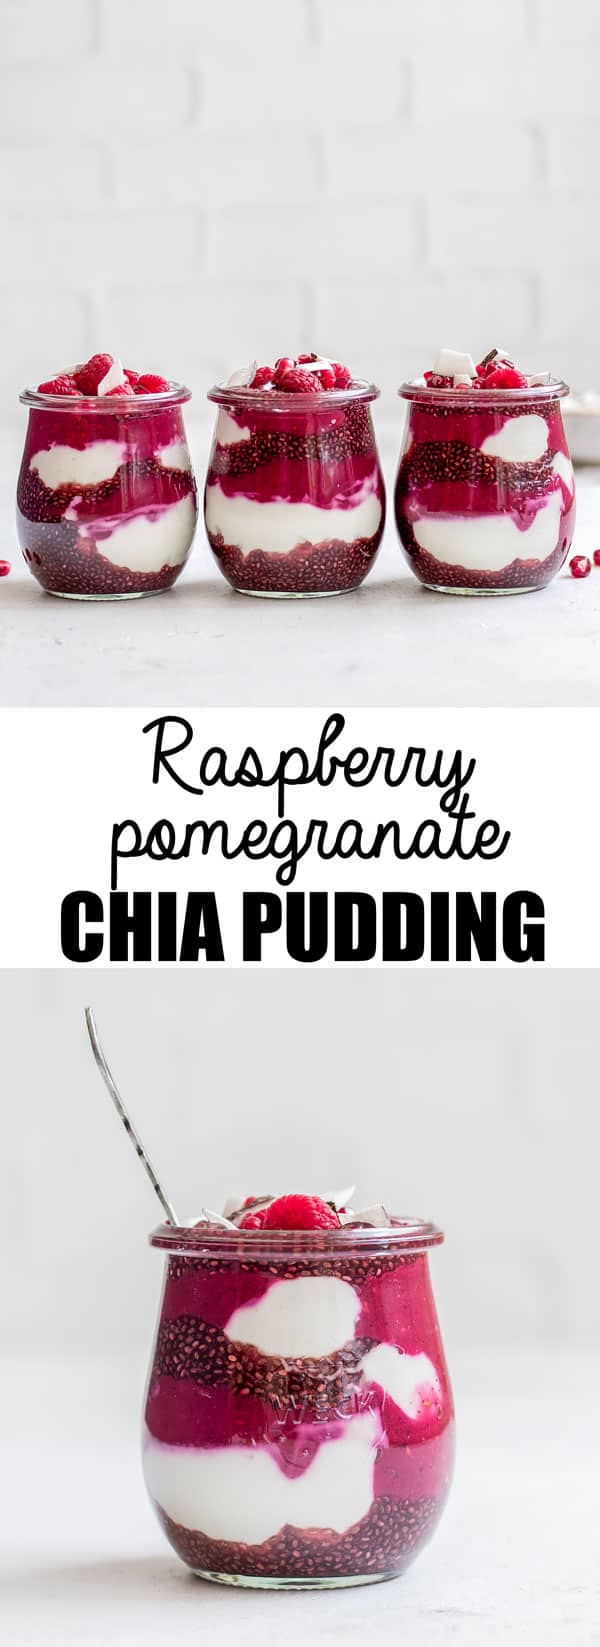 This raspberry pomegranate chia pudding parfait is a healthy and easy breakfast that is gluten-free, vegan, paleo, and whole 30 approved! 